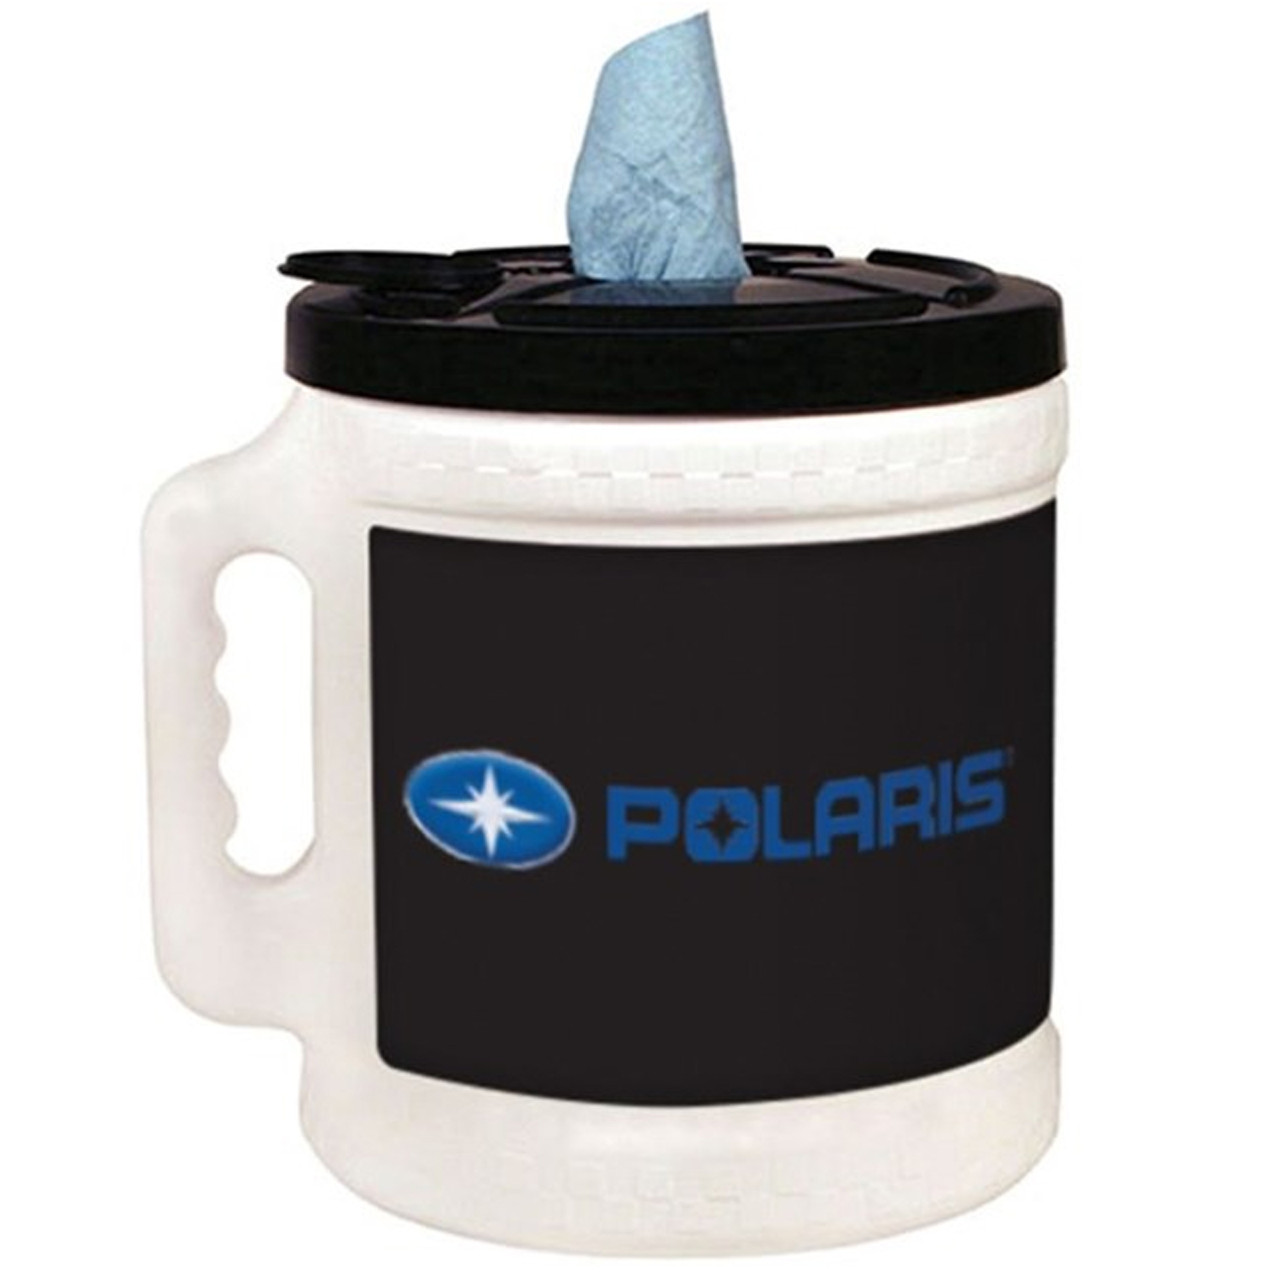 Polaris Snowmobile New OEM, Shop Towels, 200 Towels with Dispenser, 2830402